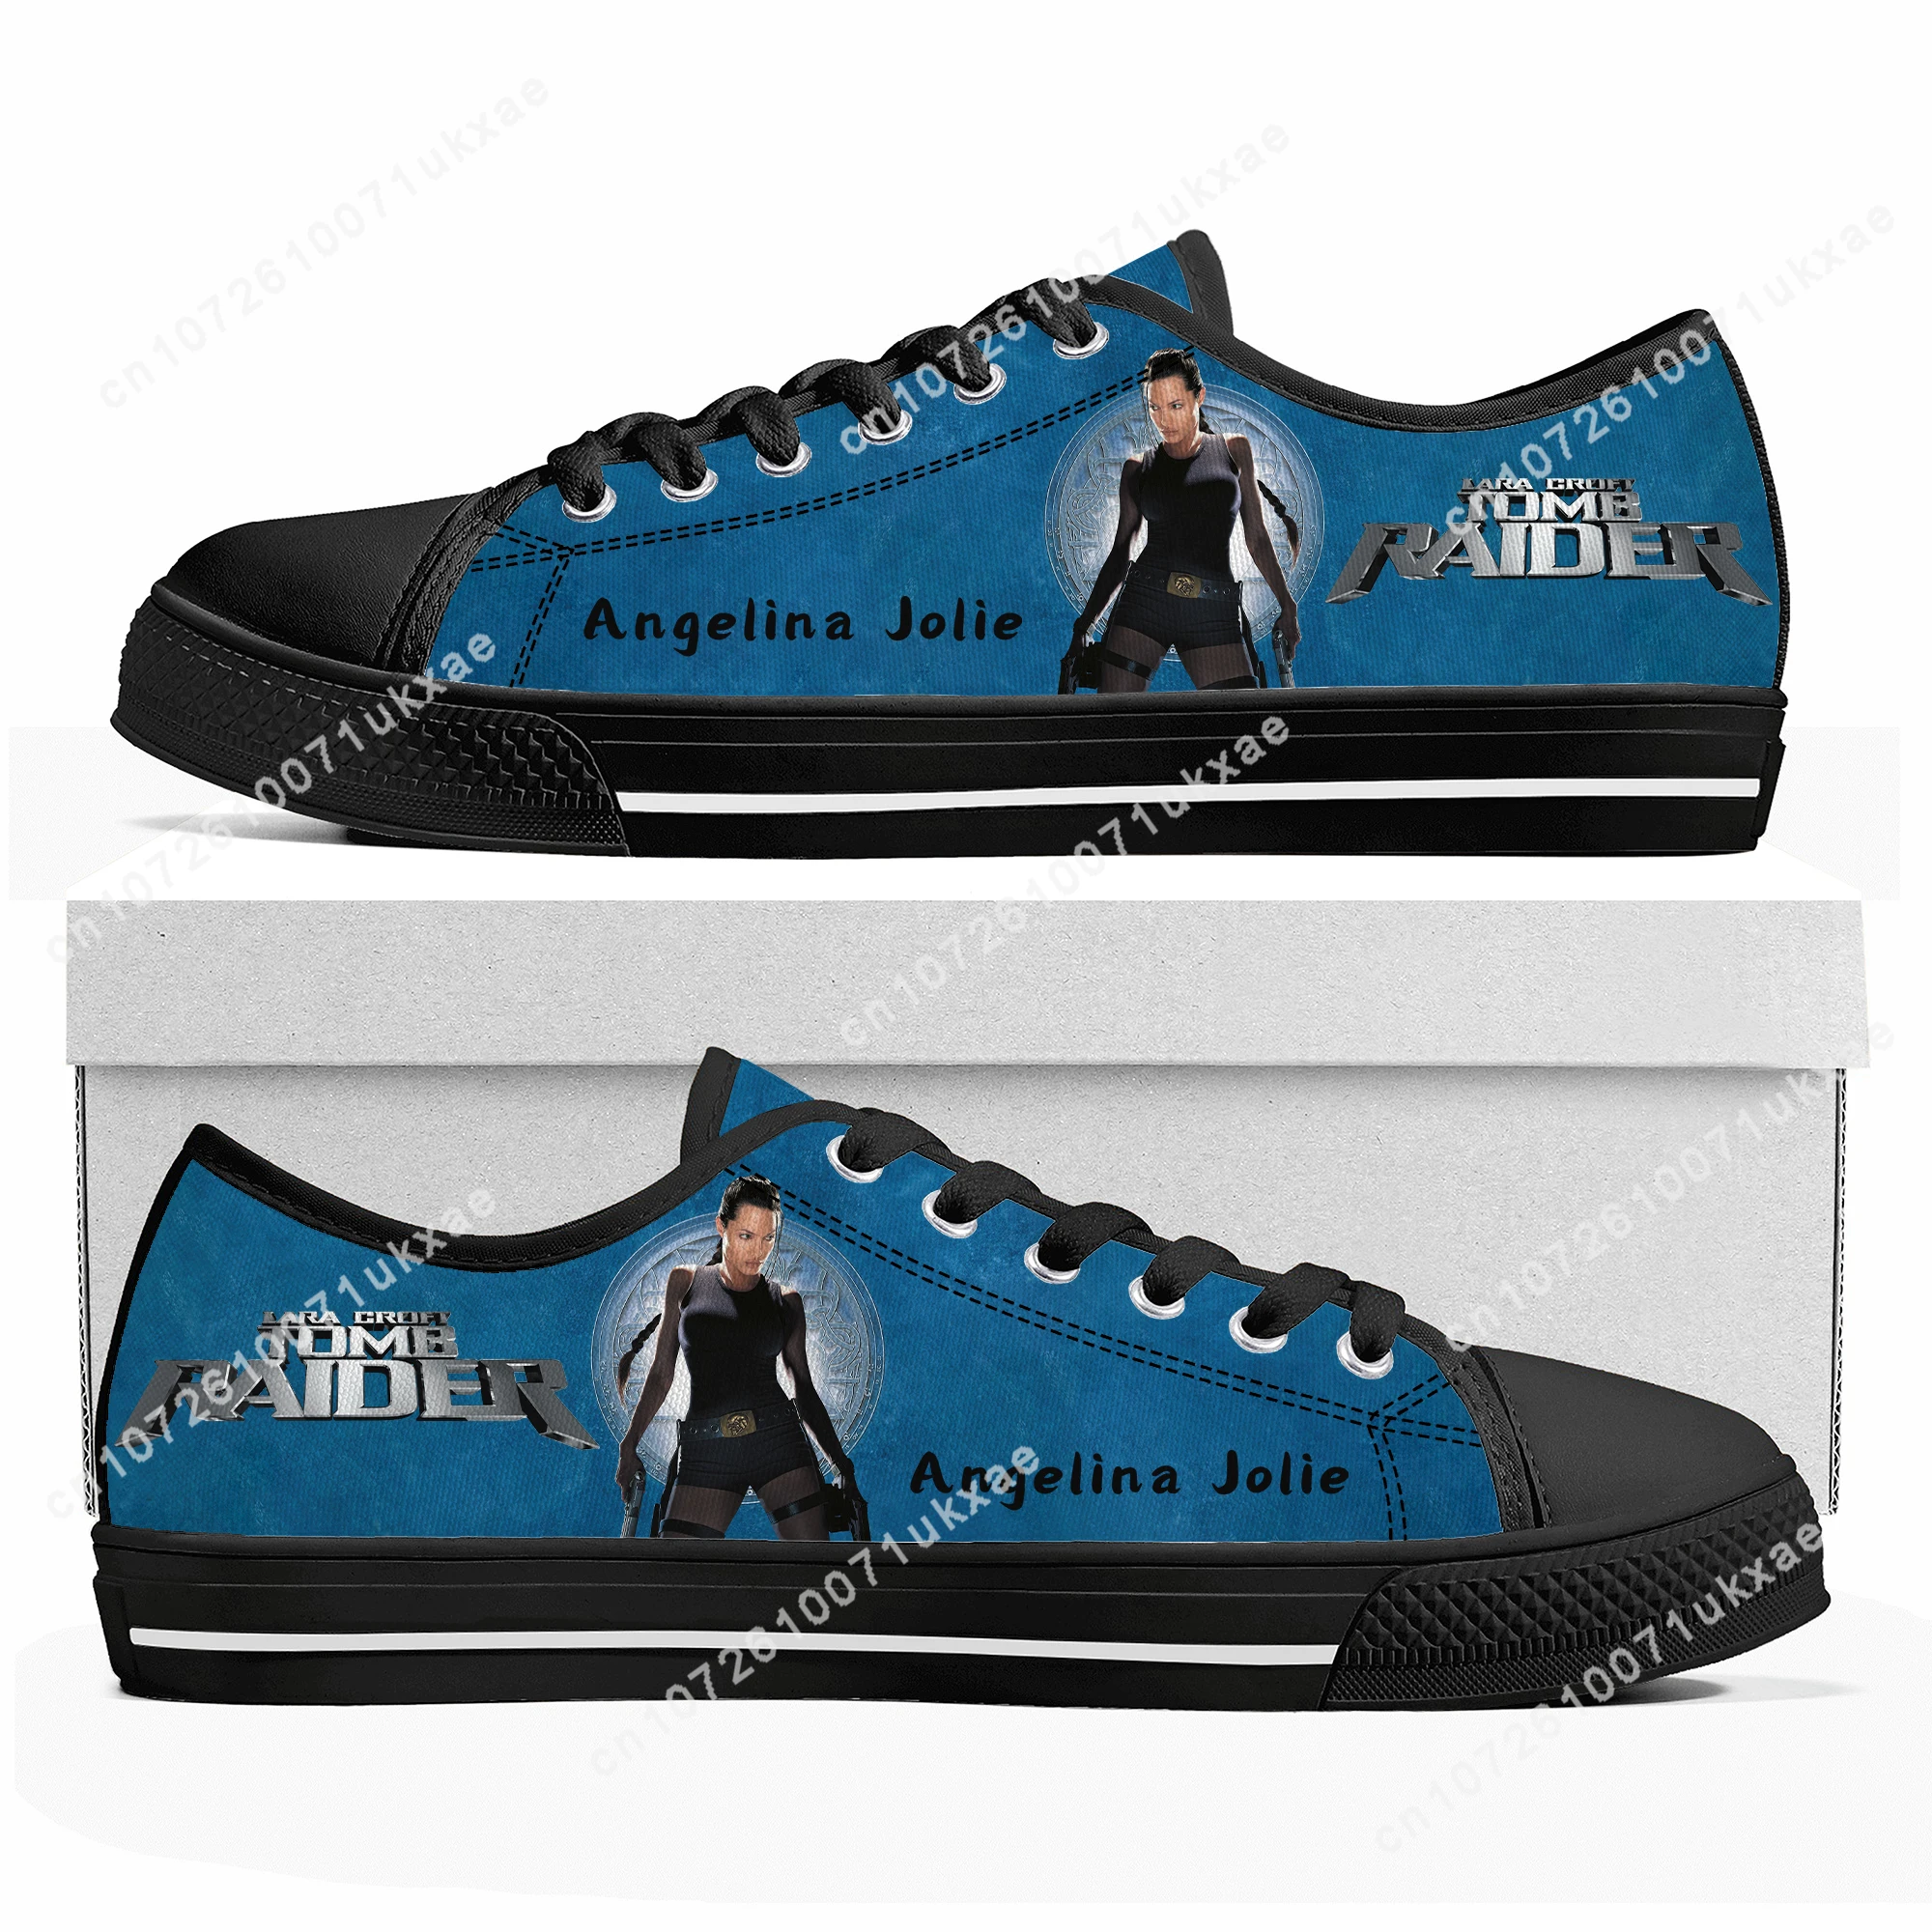 

Lara Croft Tomb Raider Low Top Sneakers Mens Womens Teenager Angelina Jolie Canvas Sneaker couple Casual Shoes Customize Shoe